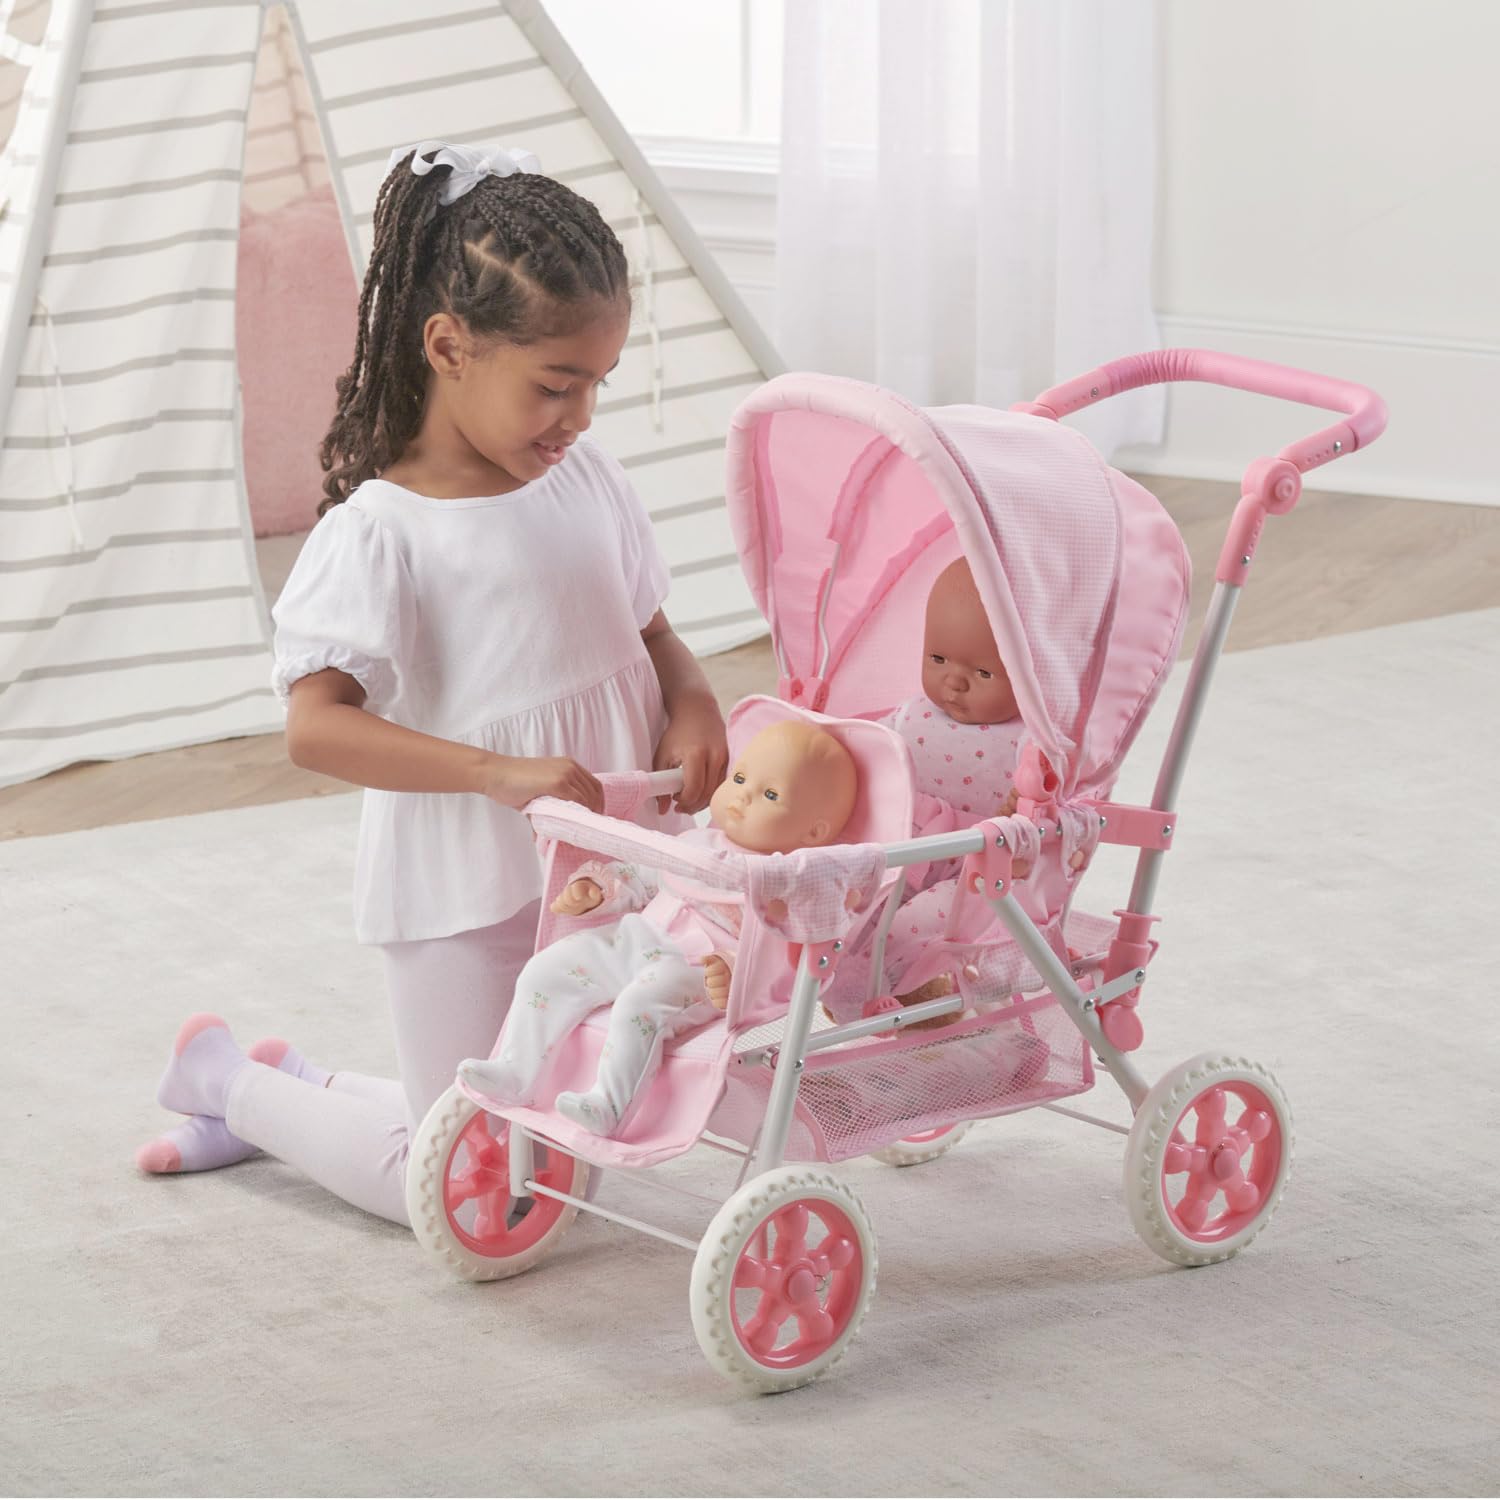 Badger Basket Toy Doll Folding Front-to-Back Double Stroller with Canopy for 18 inch Dolls - Pink/Gingham